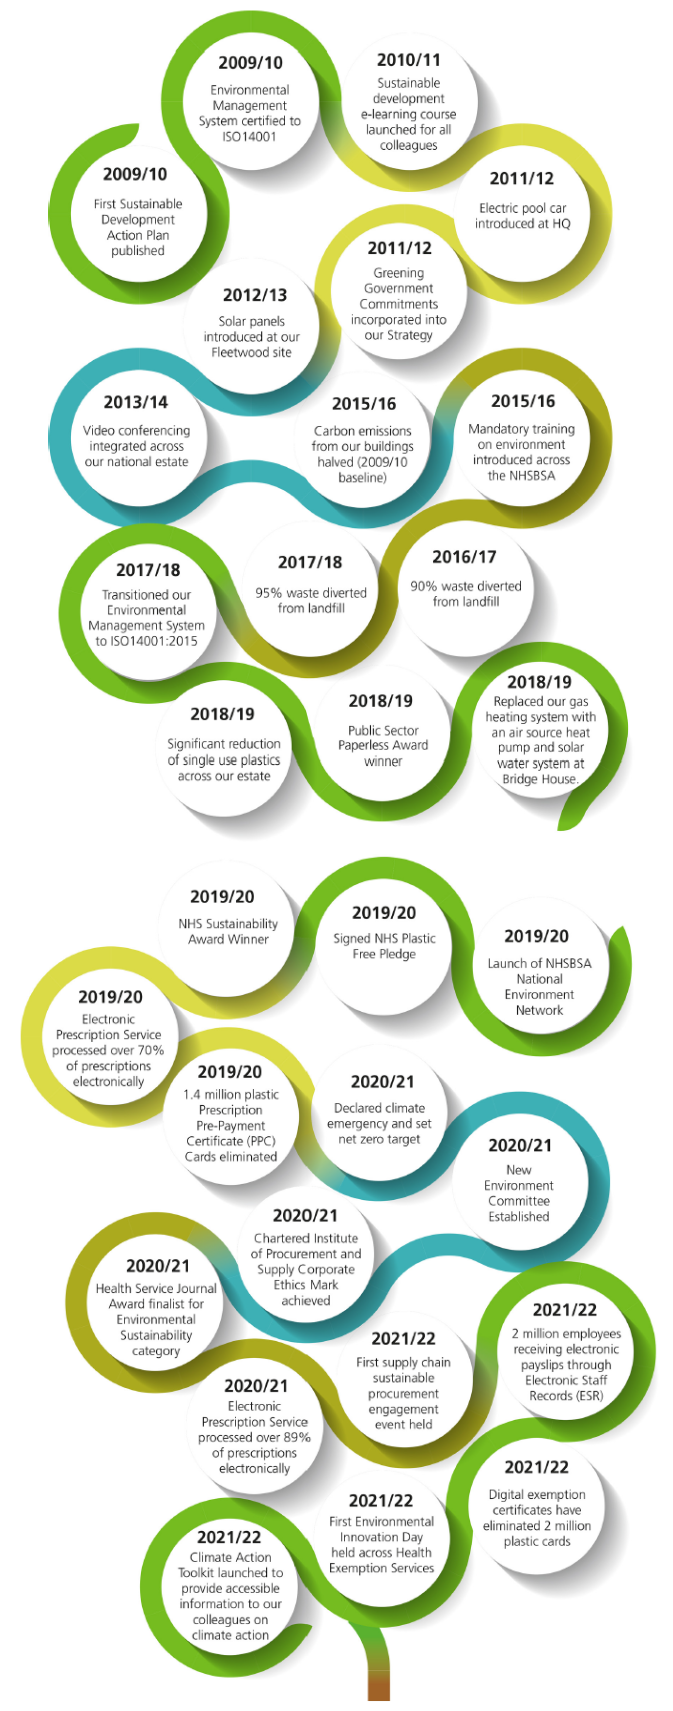 This infographic summarises our year-on-year sustainability journey so far.